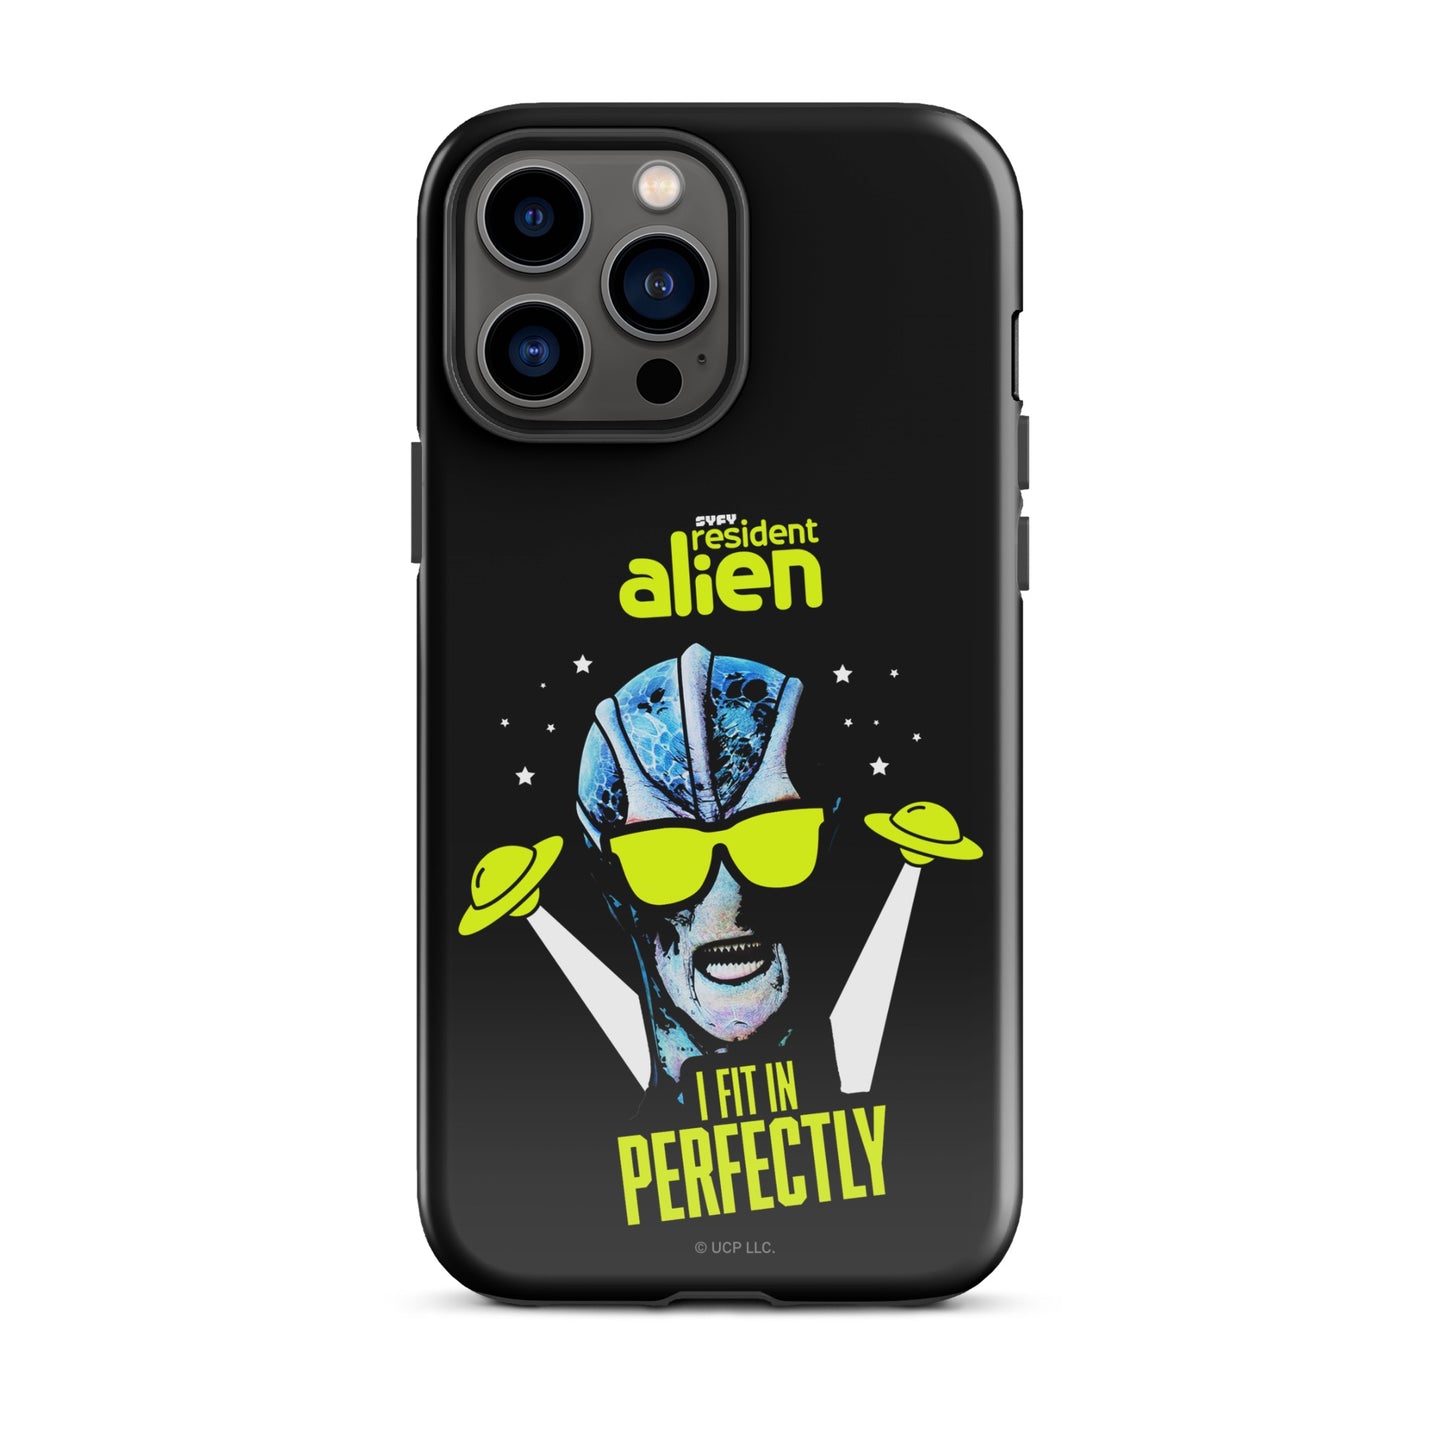 Resident Alien I Fit In Perfectly iPhone Case